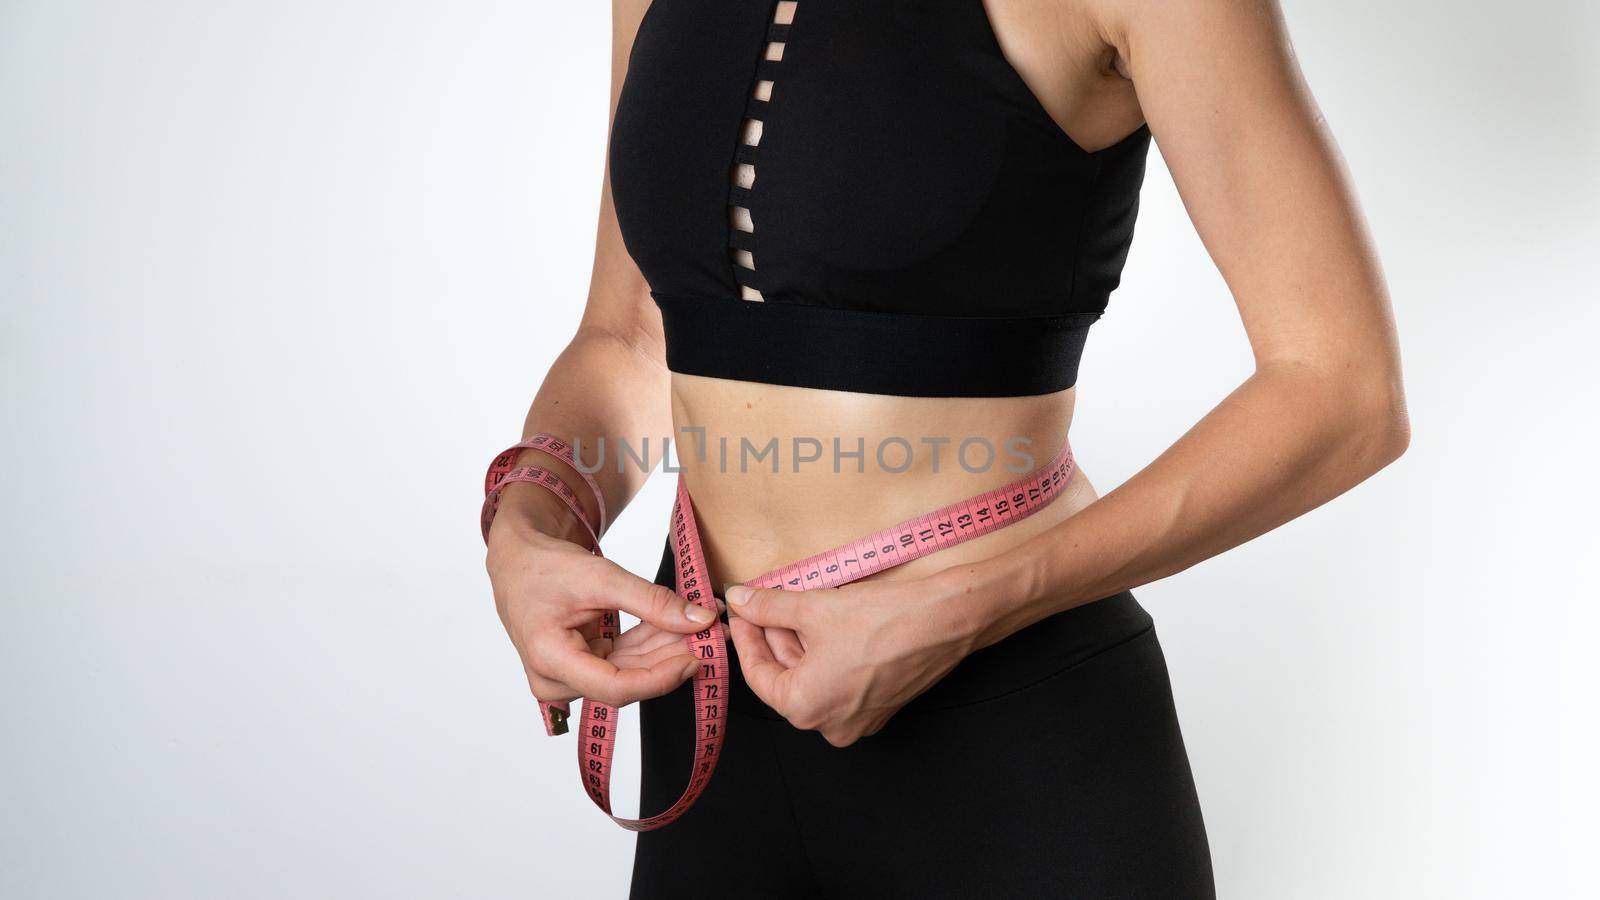 Female Athletic Figure - Measure Waist with Measuring Tape by voktybre